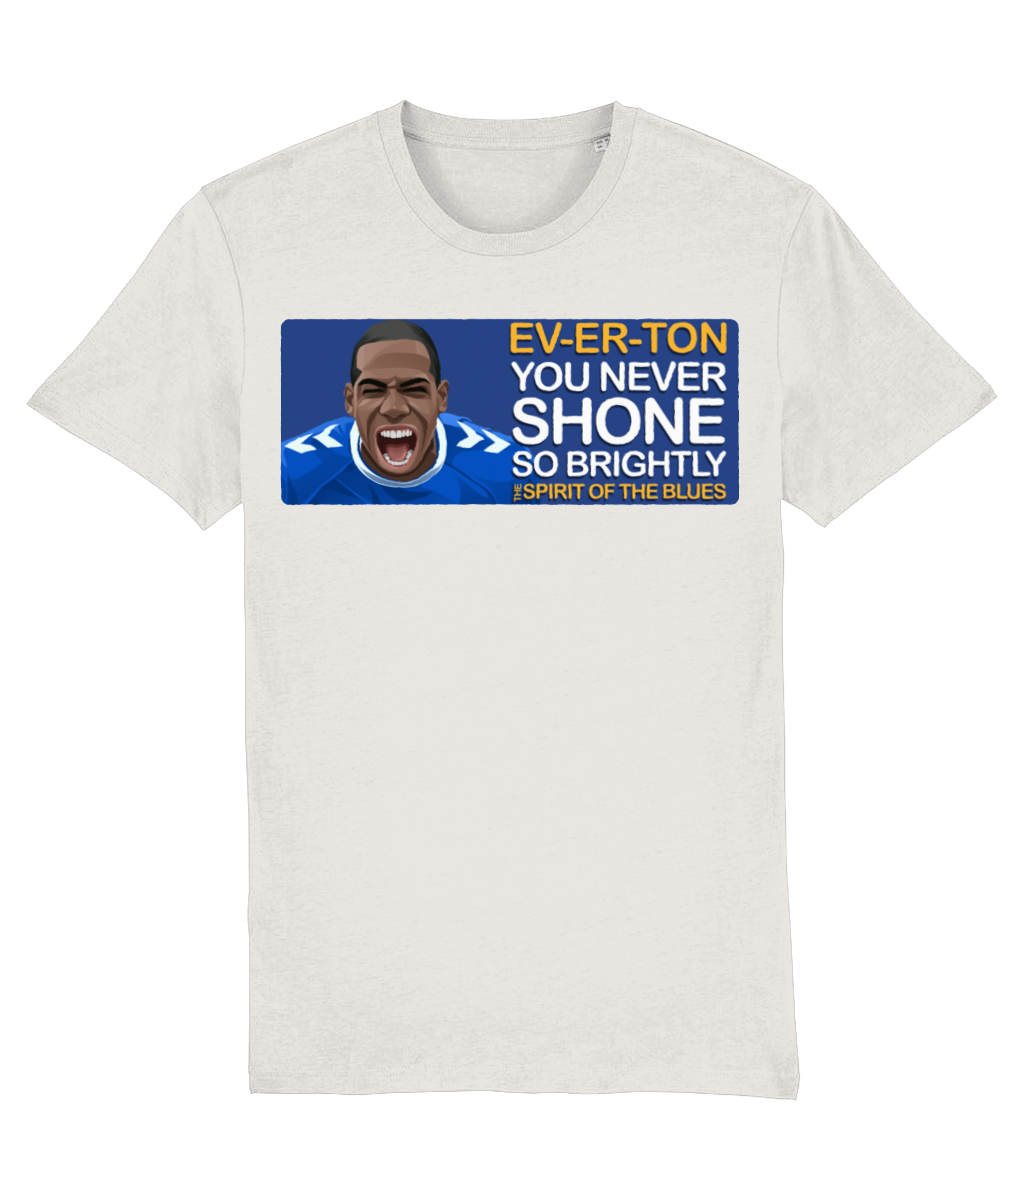 Everton Abdoulaye Doucoure The Spirit Of The Blues Unisex T-Shirt Stanley/Stella Retrotext Vintage White XX-Small 